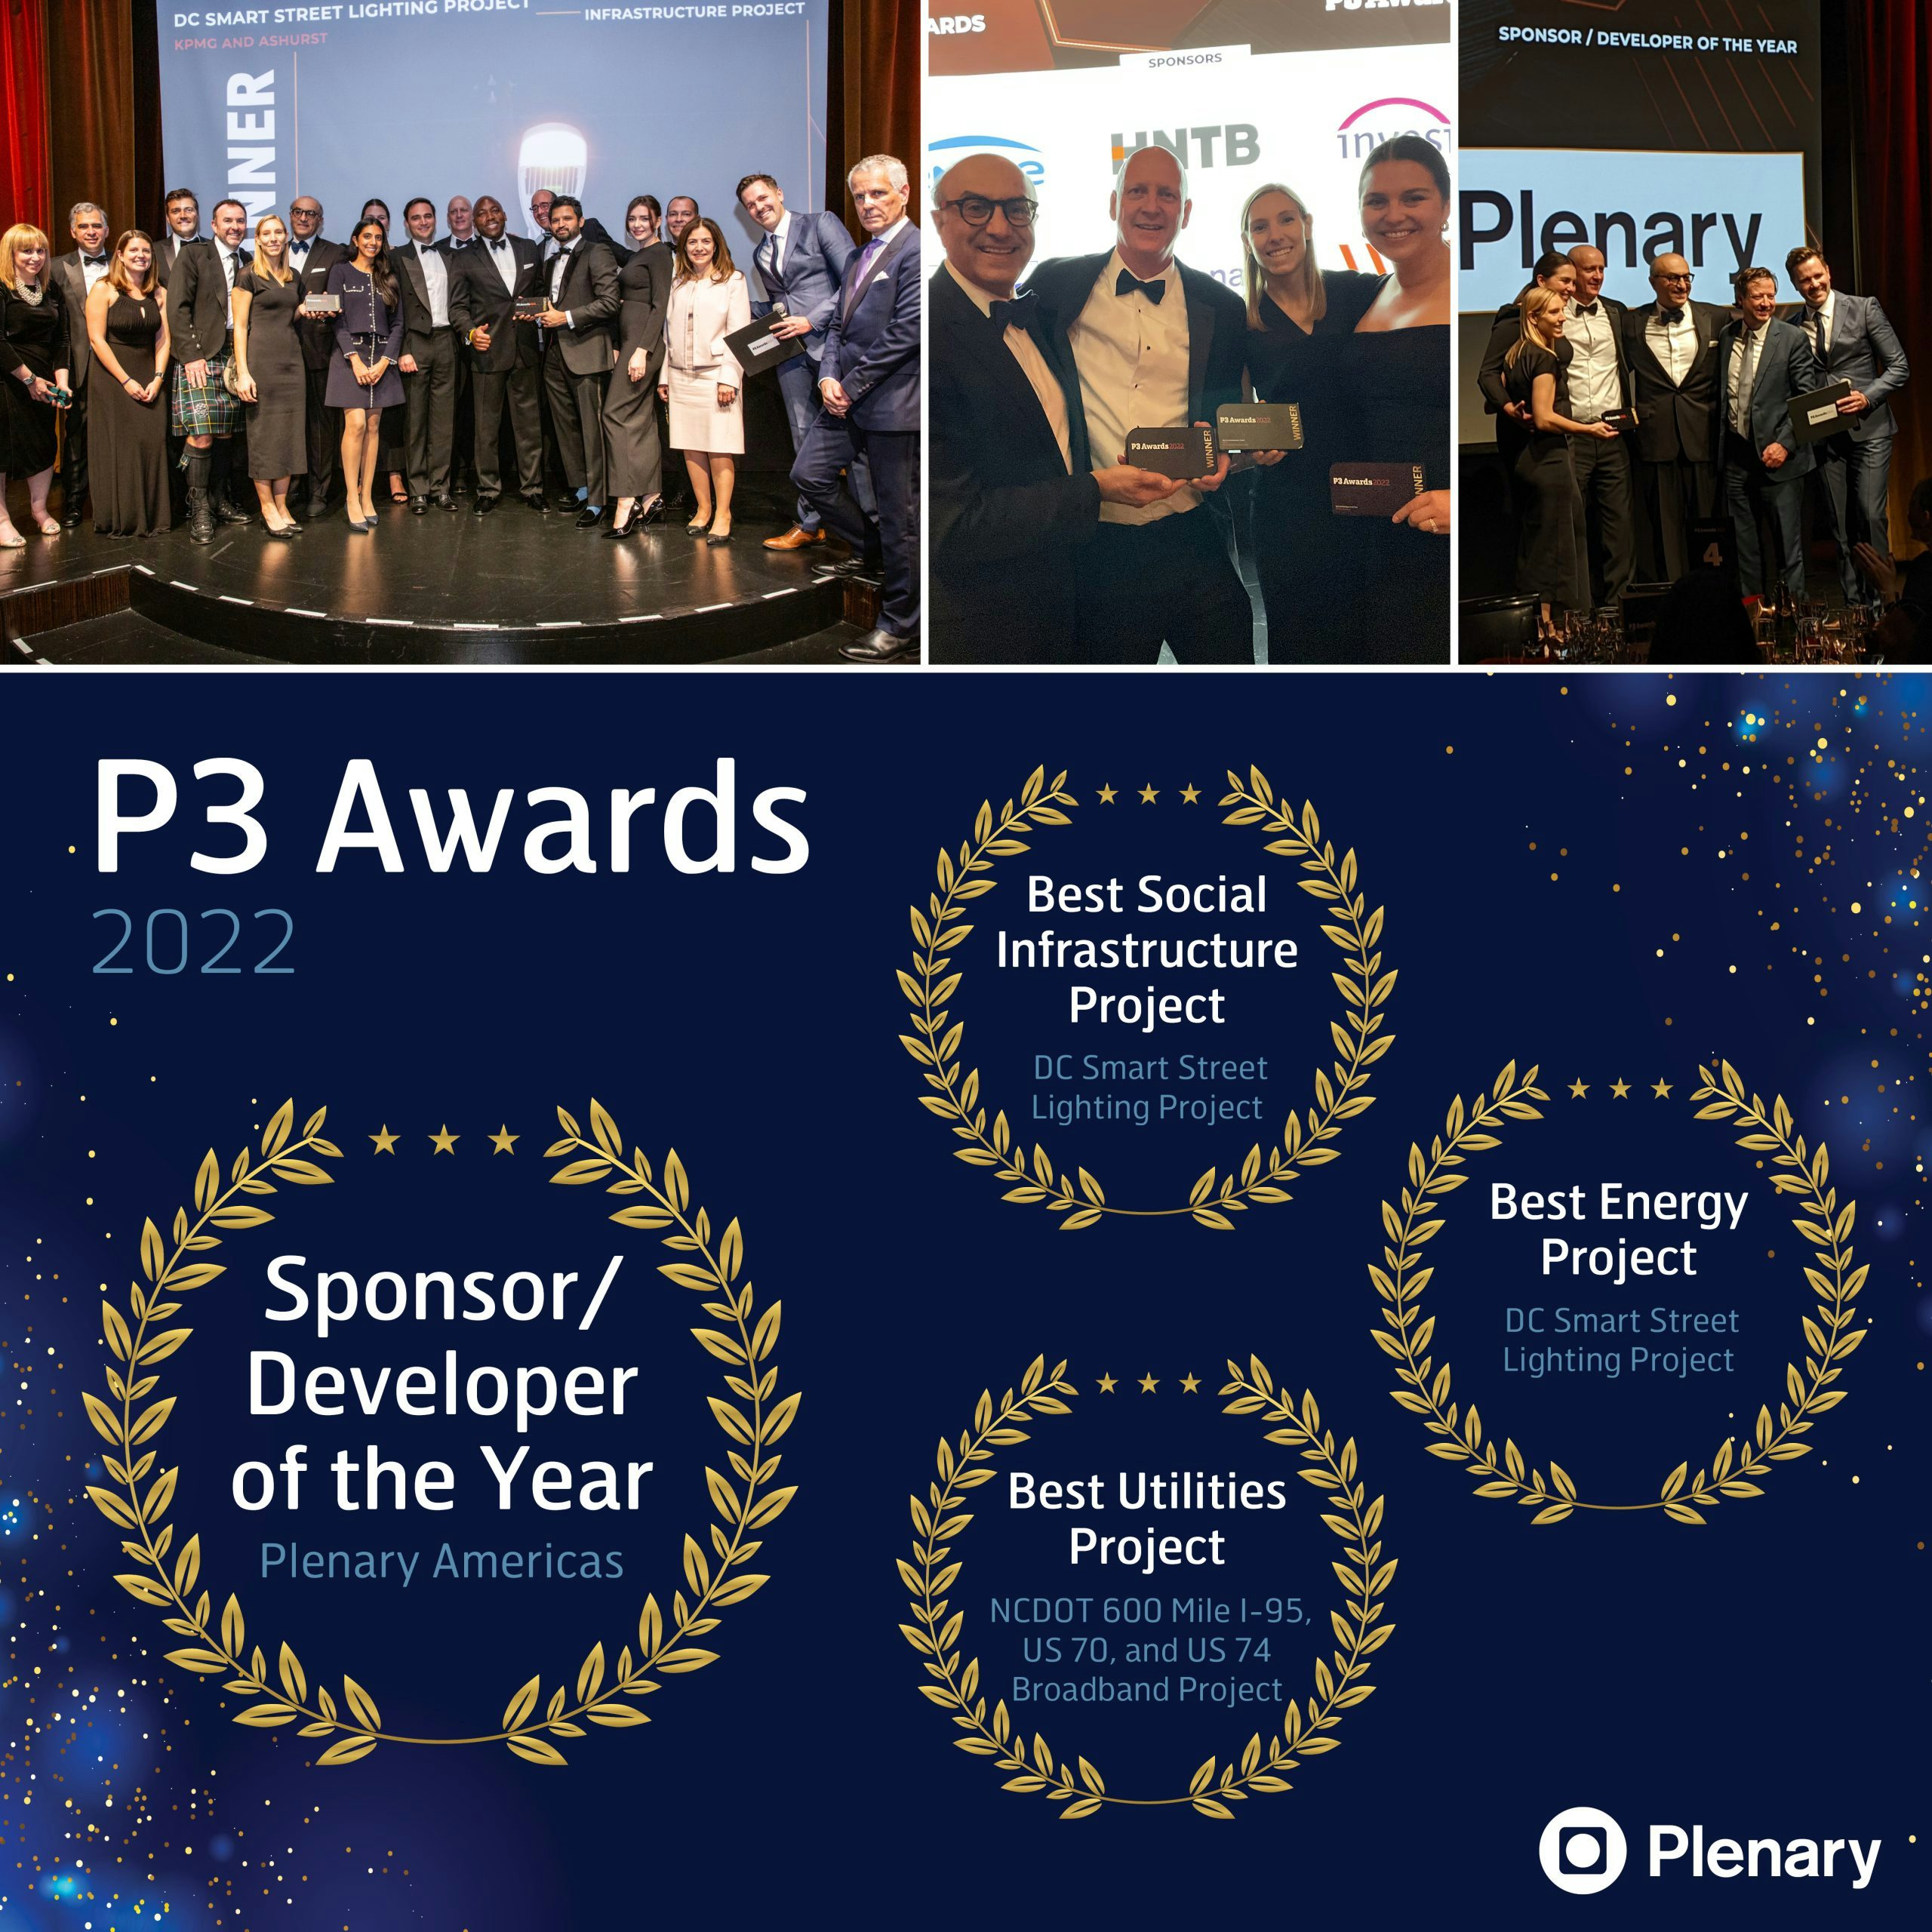 Plenary Americas recognized with infrastructure awards image